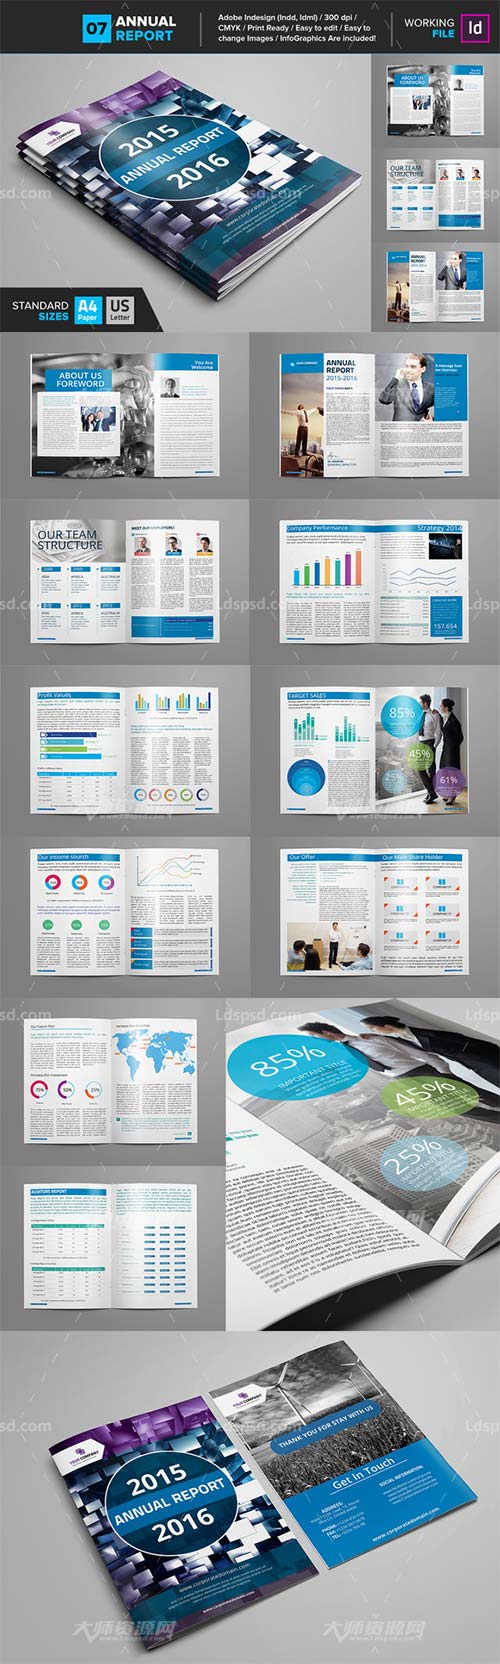 Clean Corporate Annual Report_V7,indesign模板－年终报刊(通用型)